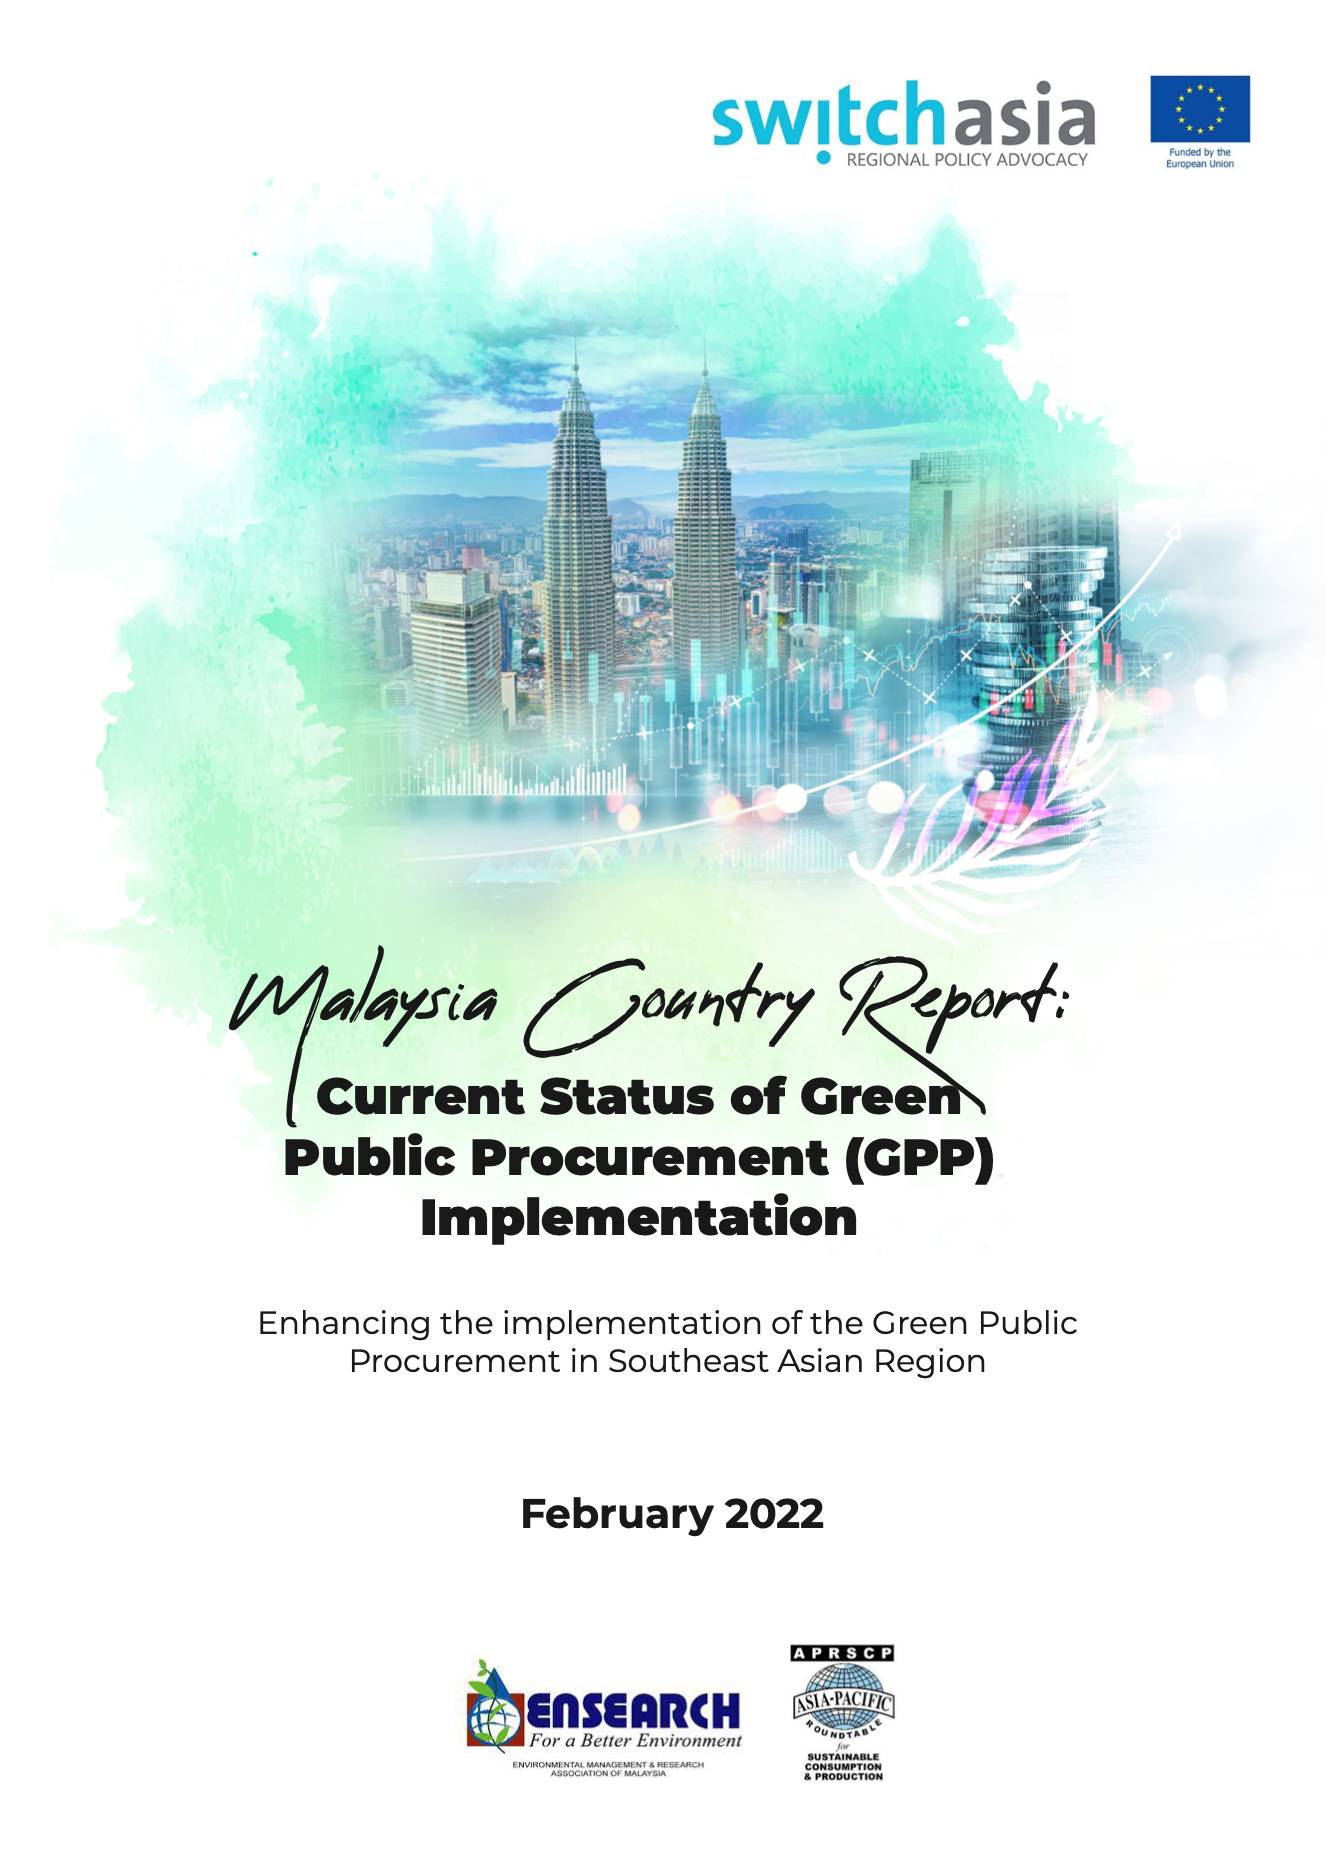 Malaysia Country Report: Current Status of Green Public Procurement Implementation